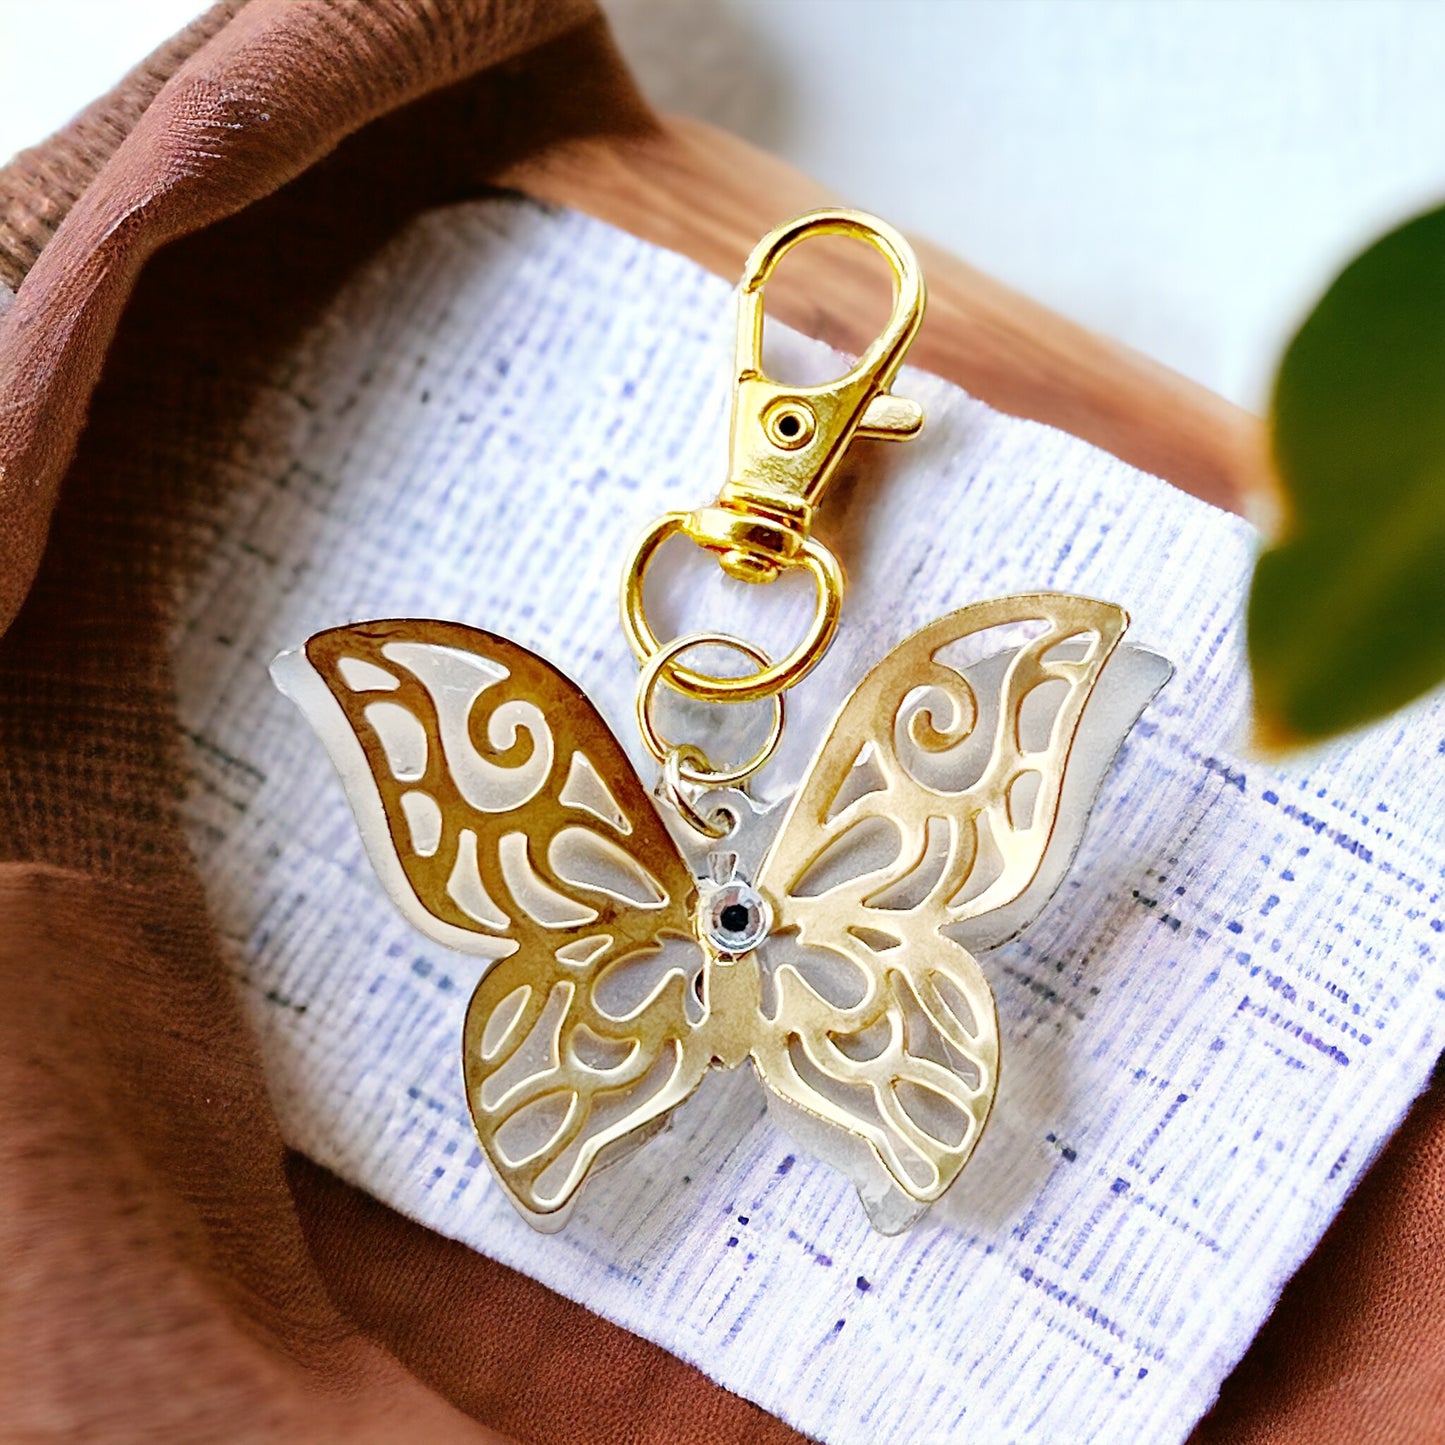 Gold & Silver Butterfly Zipper Pull Keychain Purse Charm with Filigree & Rhinestone Accents - Elegant & Stylish Accessory for Your Bag